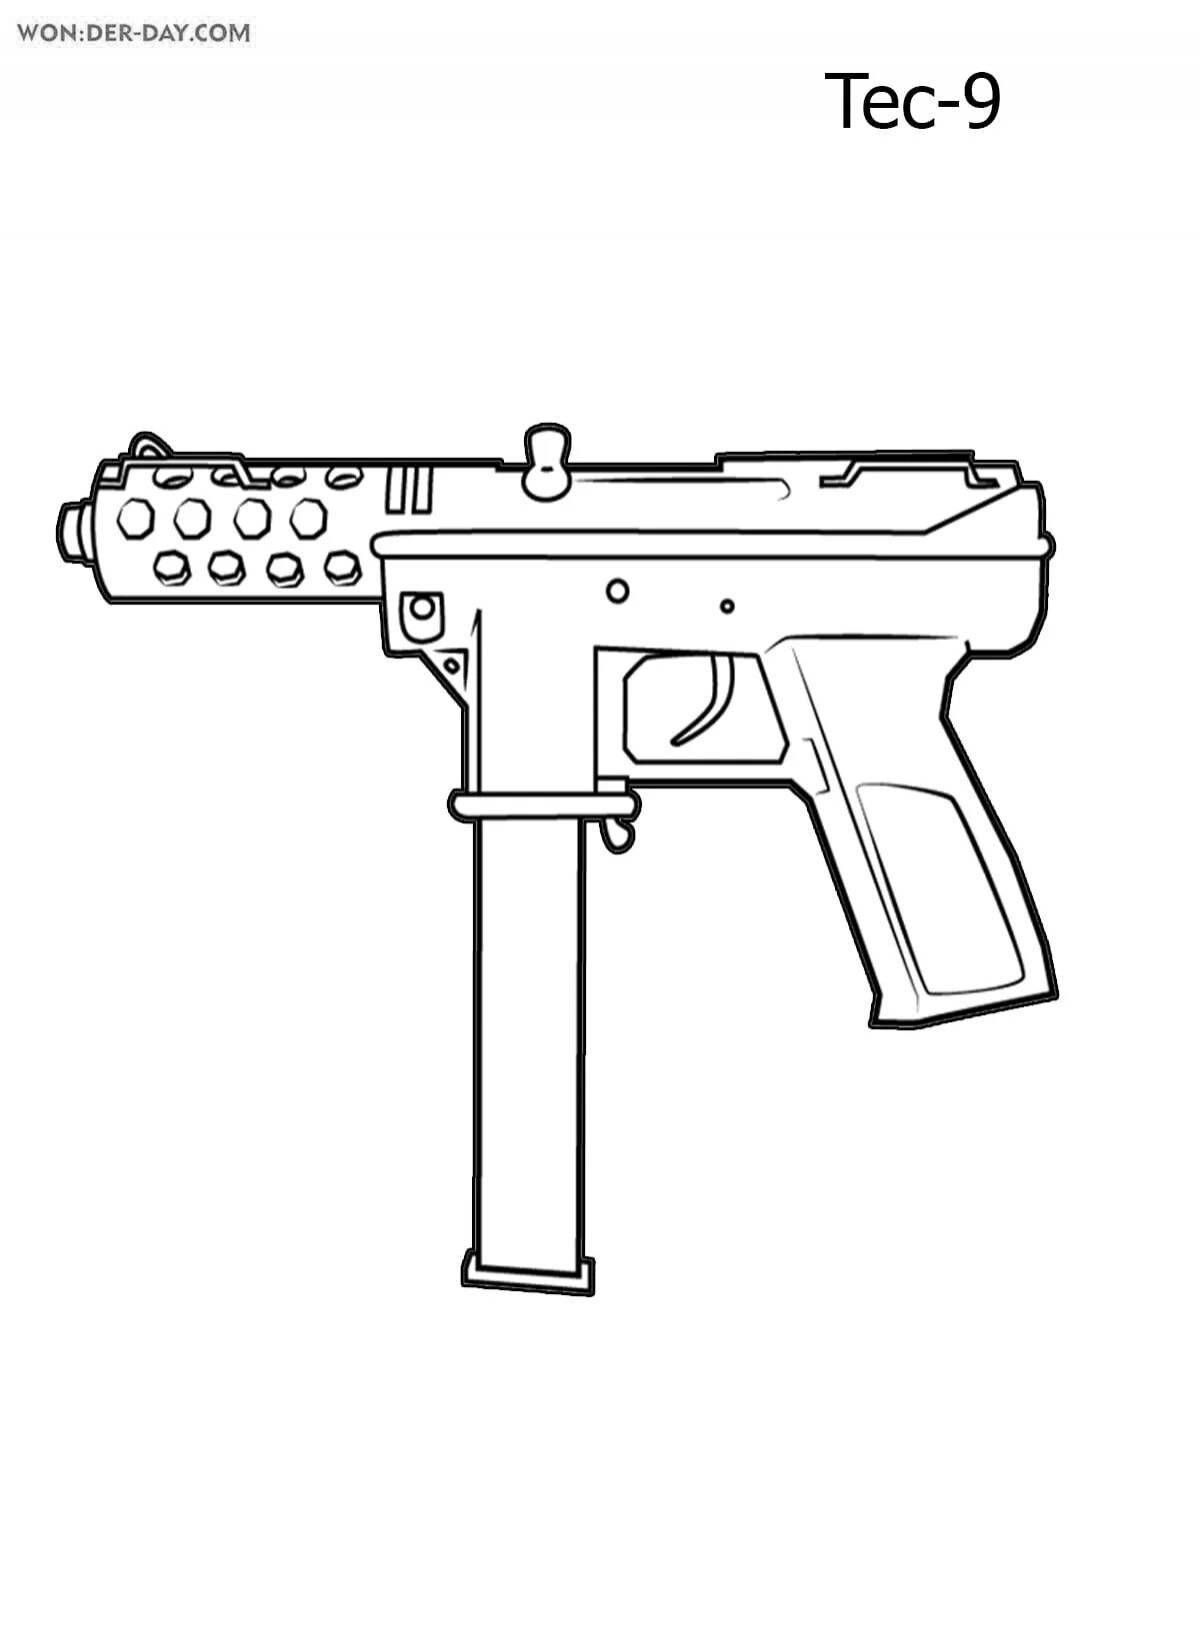 Exciting standoff 2 weapon coloring